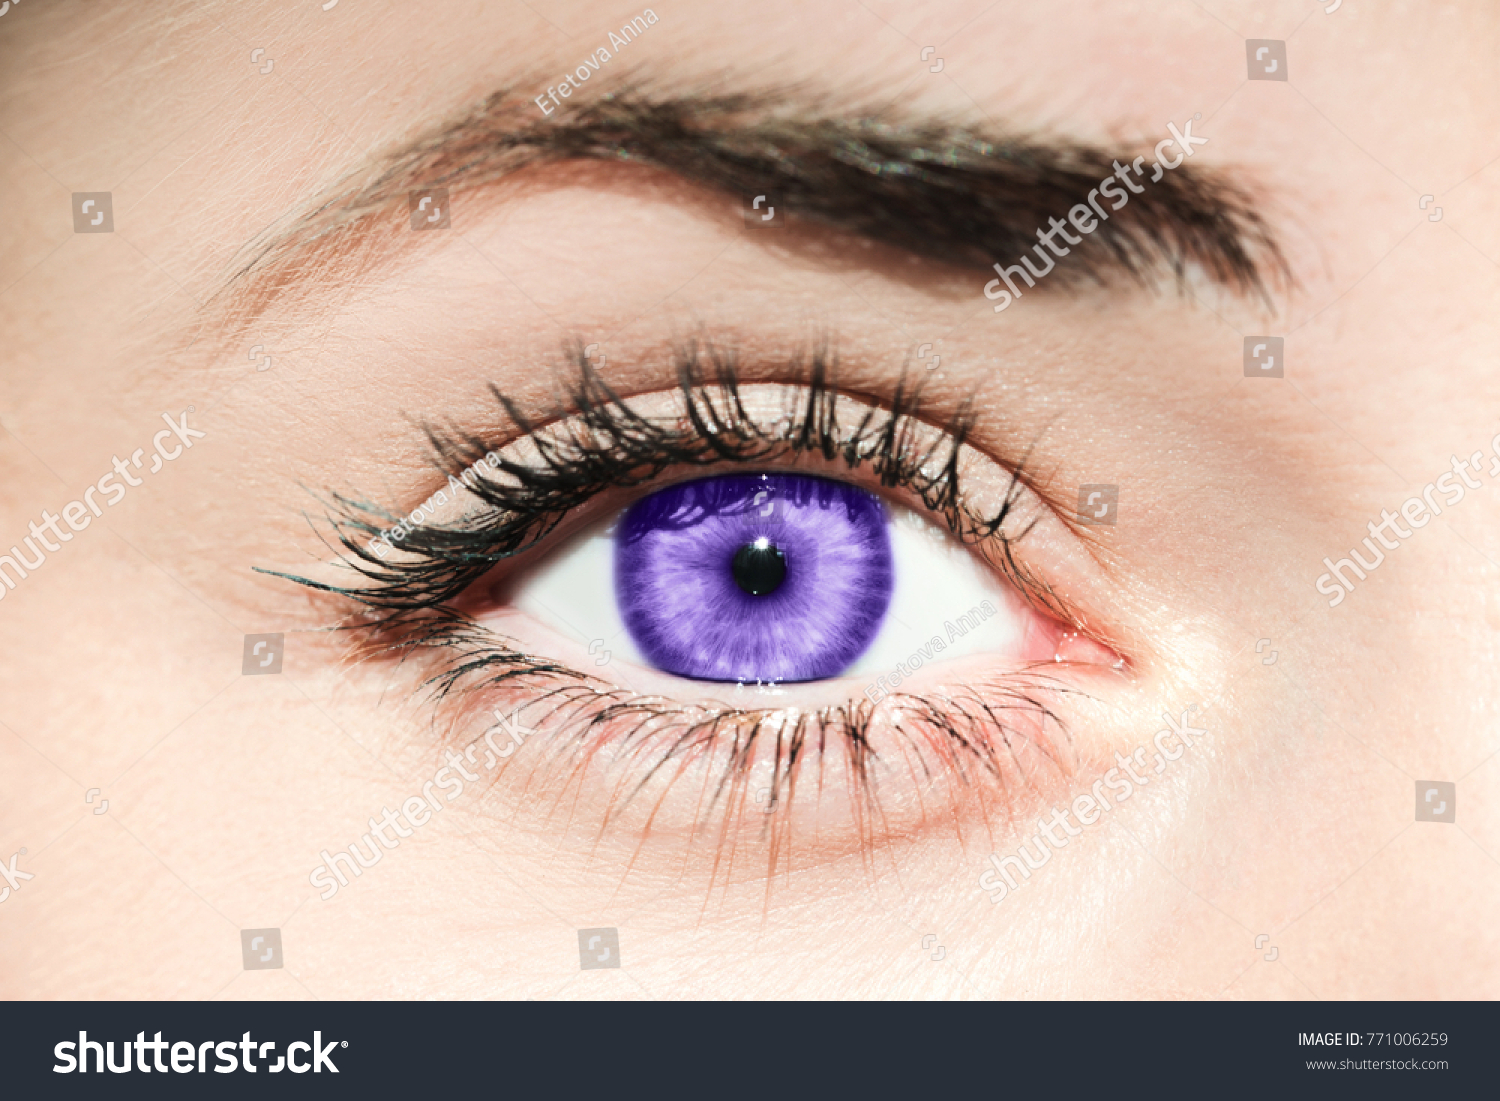 1. "Violet Eyes and Blue Hair: A Unique Combination" - wide 8